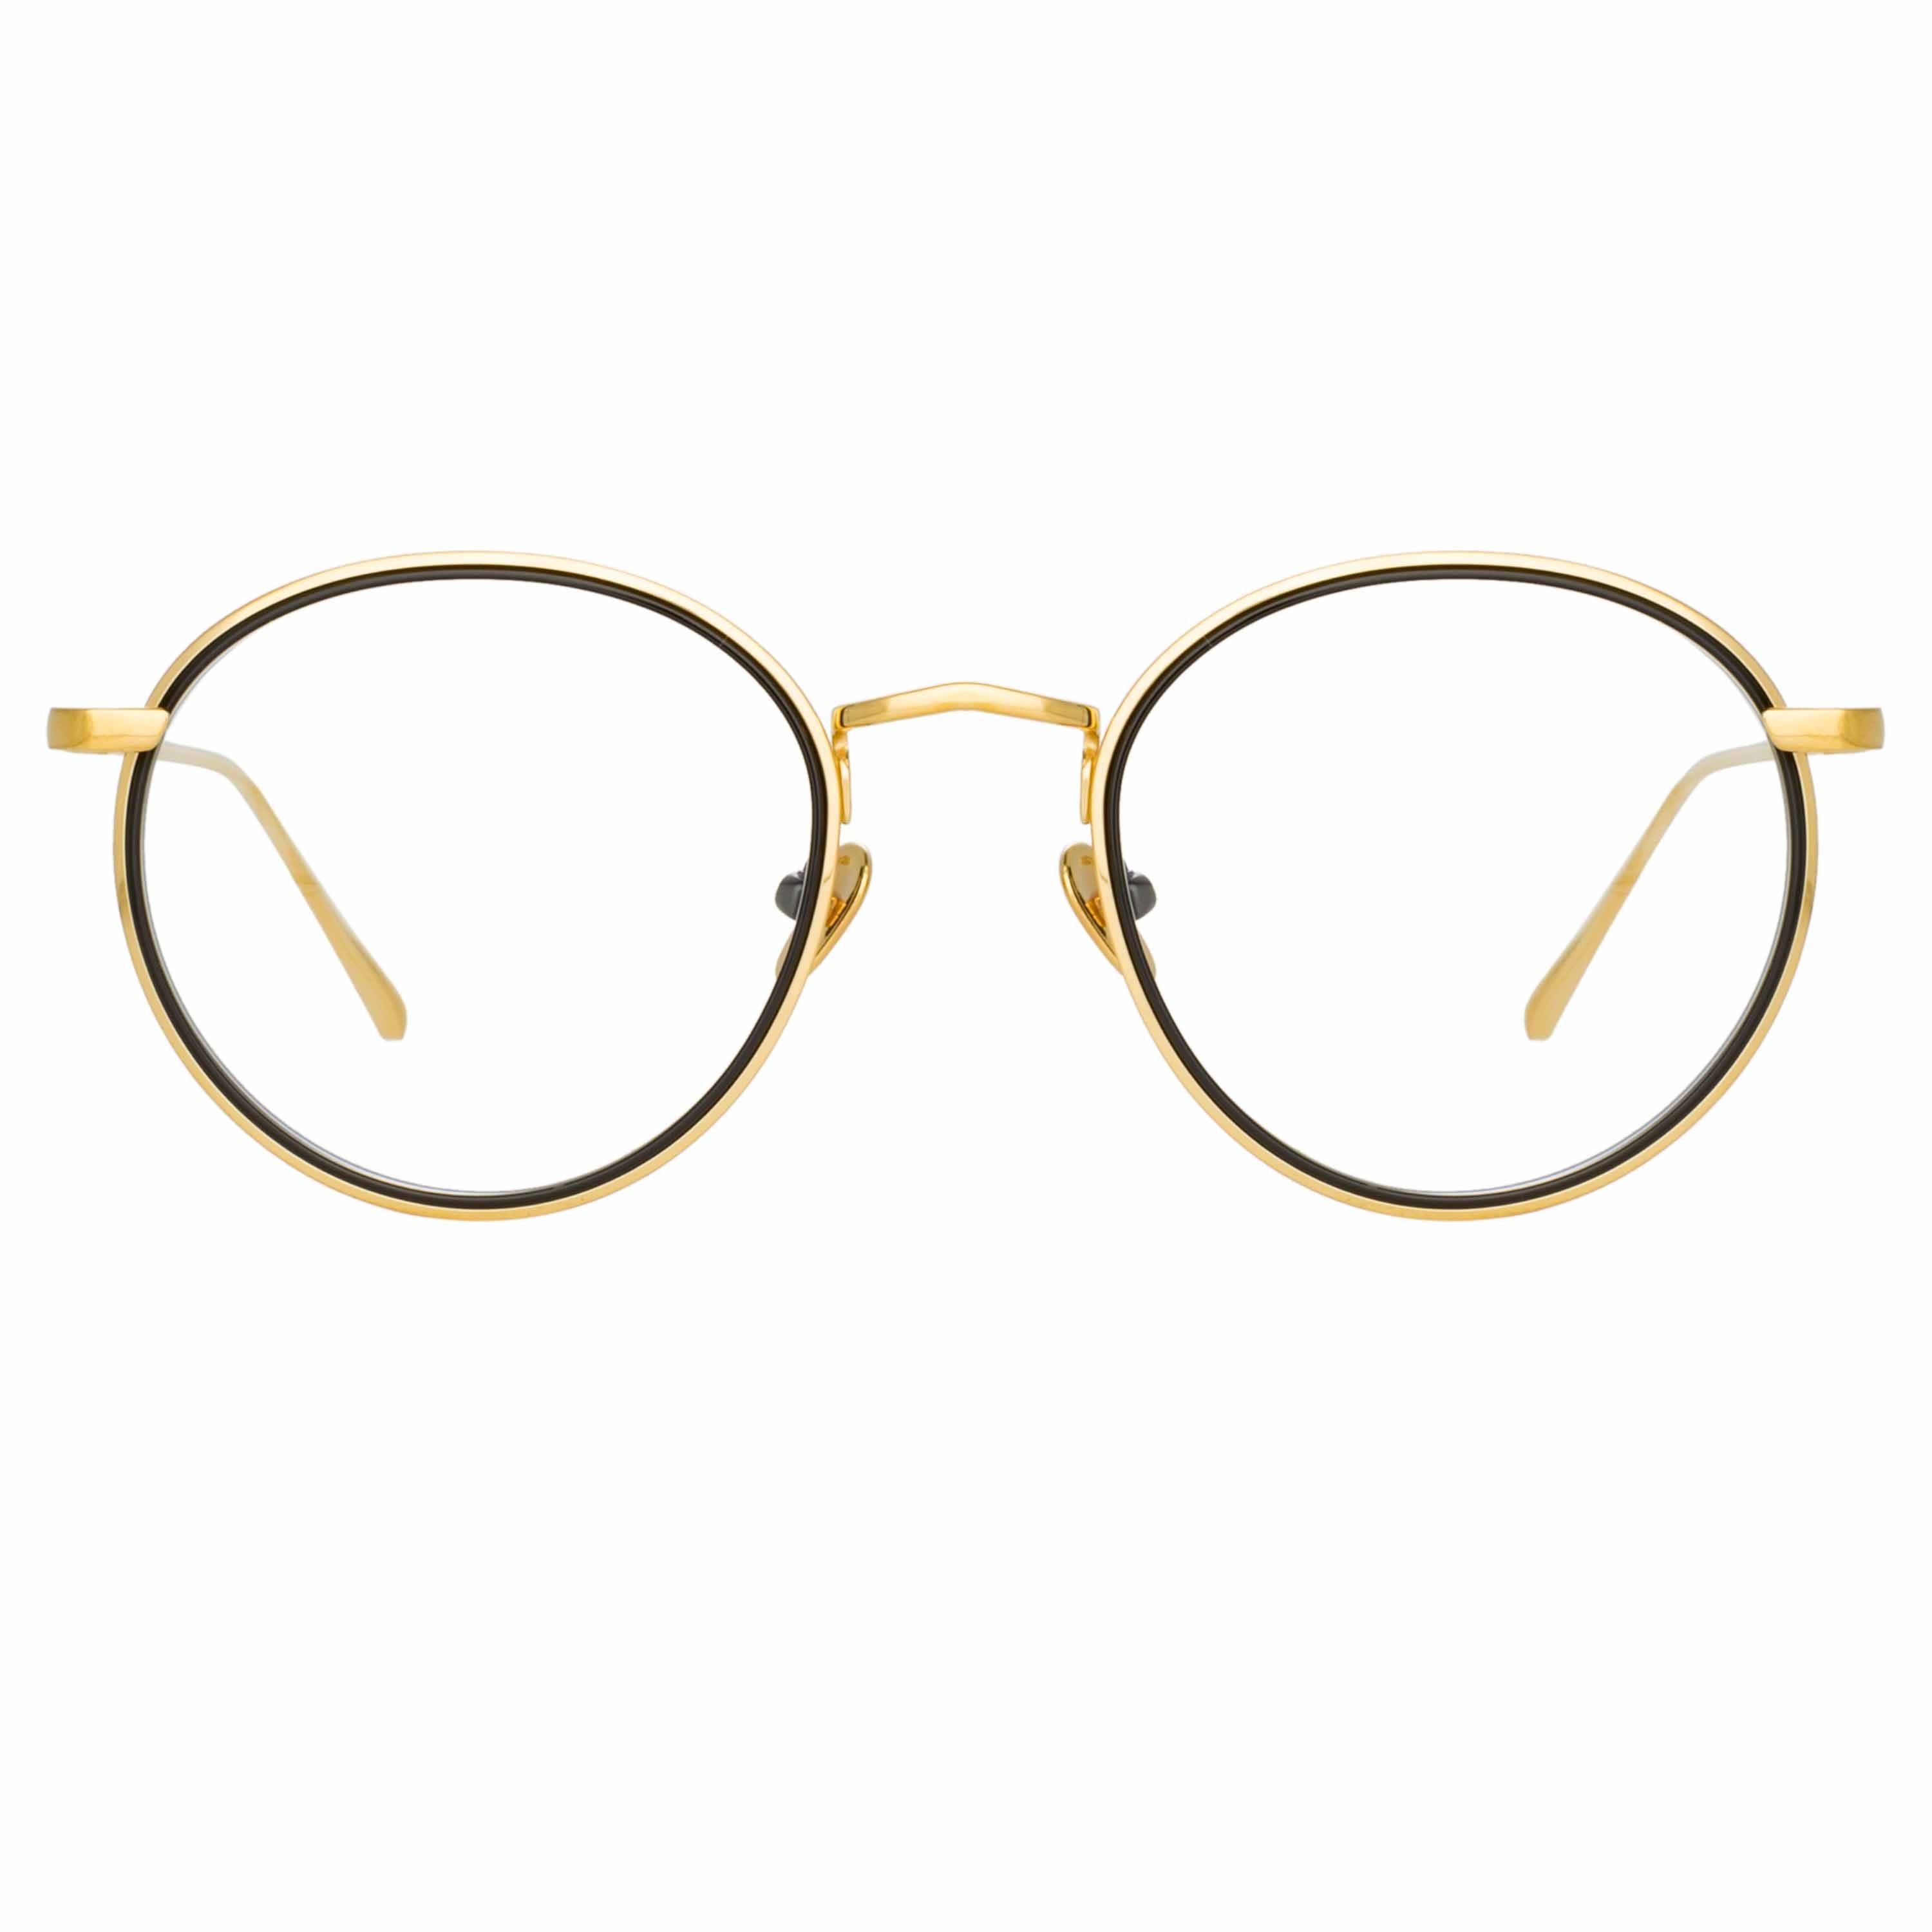 Color_LFL1190C1OPT - Comer Optical Oval Frame in Yellow Gold